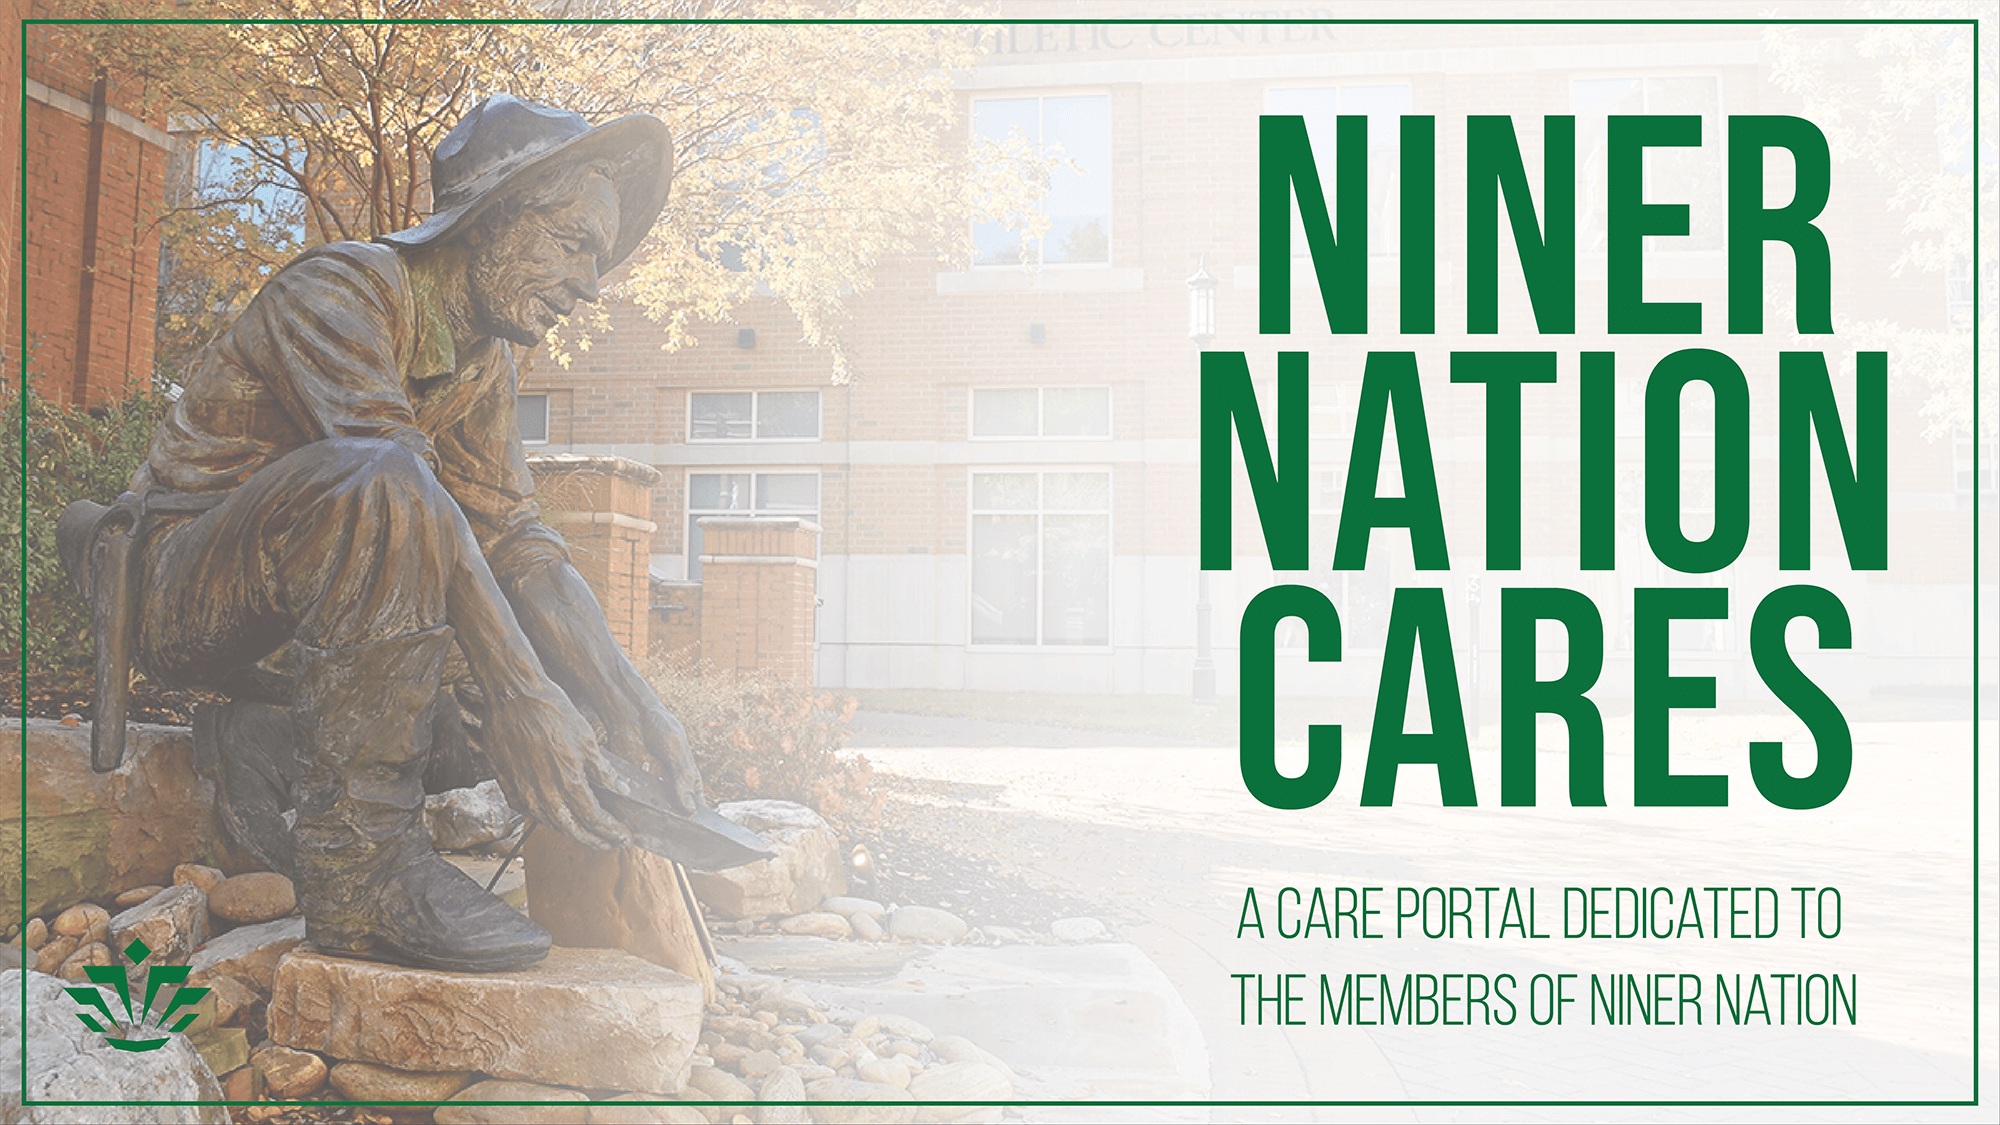 NinerNationCares: A care portal dedicated to the members of Niner Nation